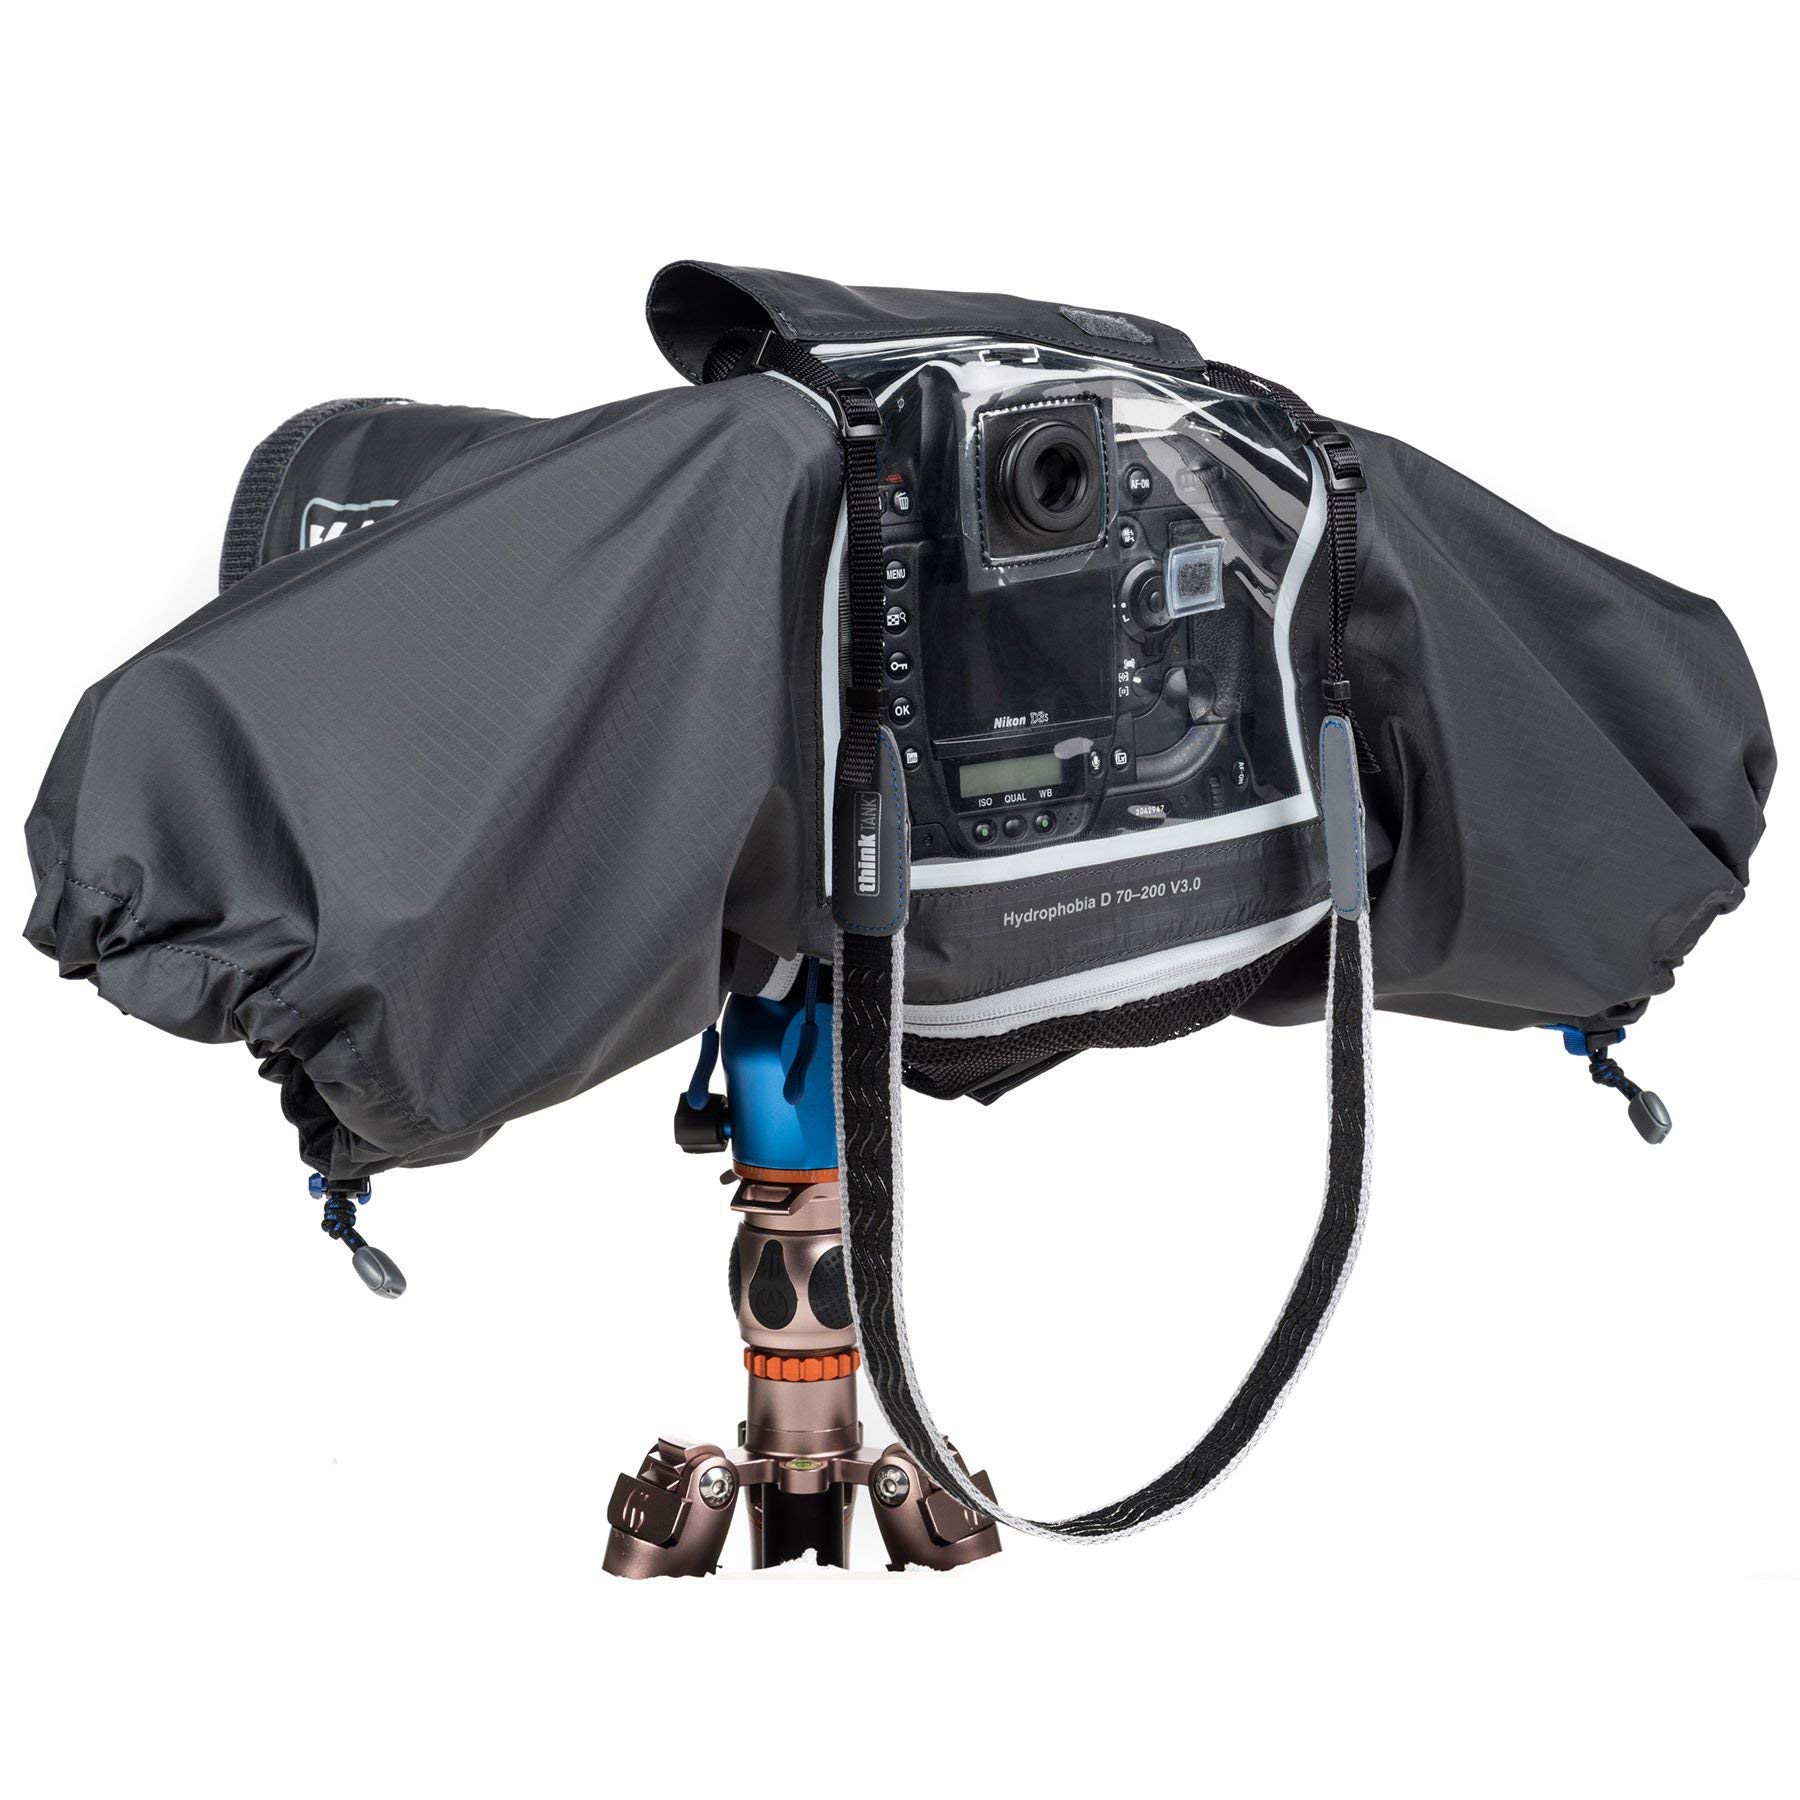 Think Tank Photo Hydrophobia D 70-200 V3 Camera Rain Cover for DSLR and Mirrorless Cameras with 70-200mm f/2.8 Lens